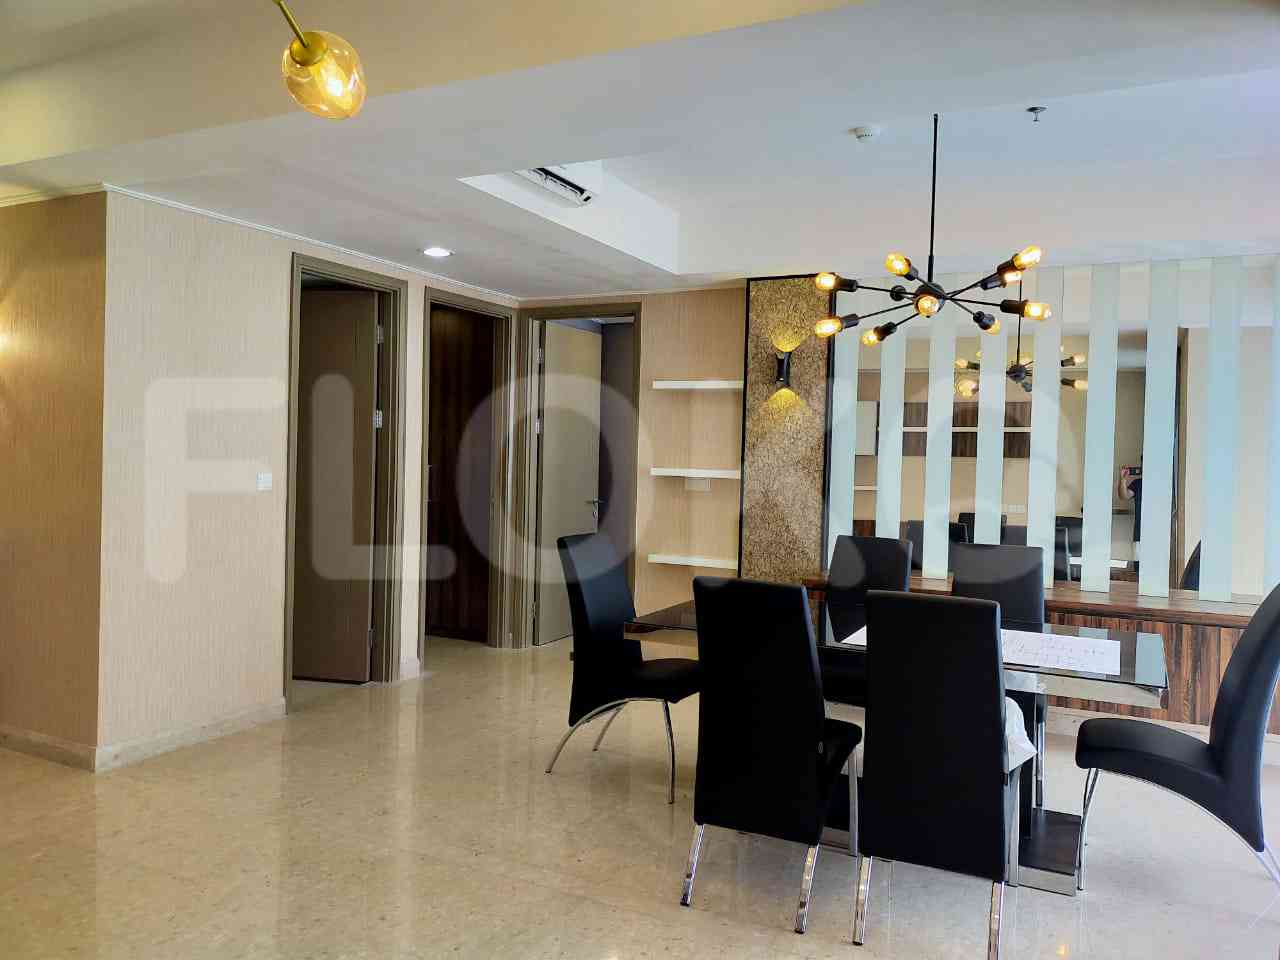 3 Bedroom on 13th Floor for Rent in Gold Coast Apartment - fka11a 4